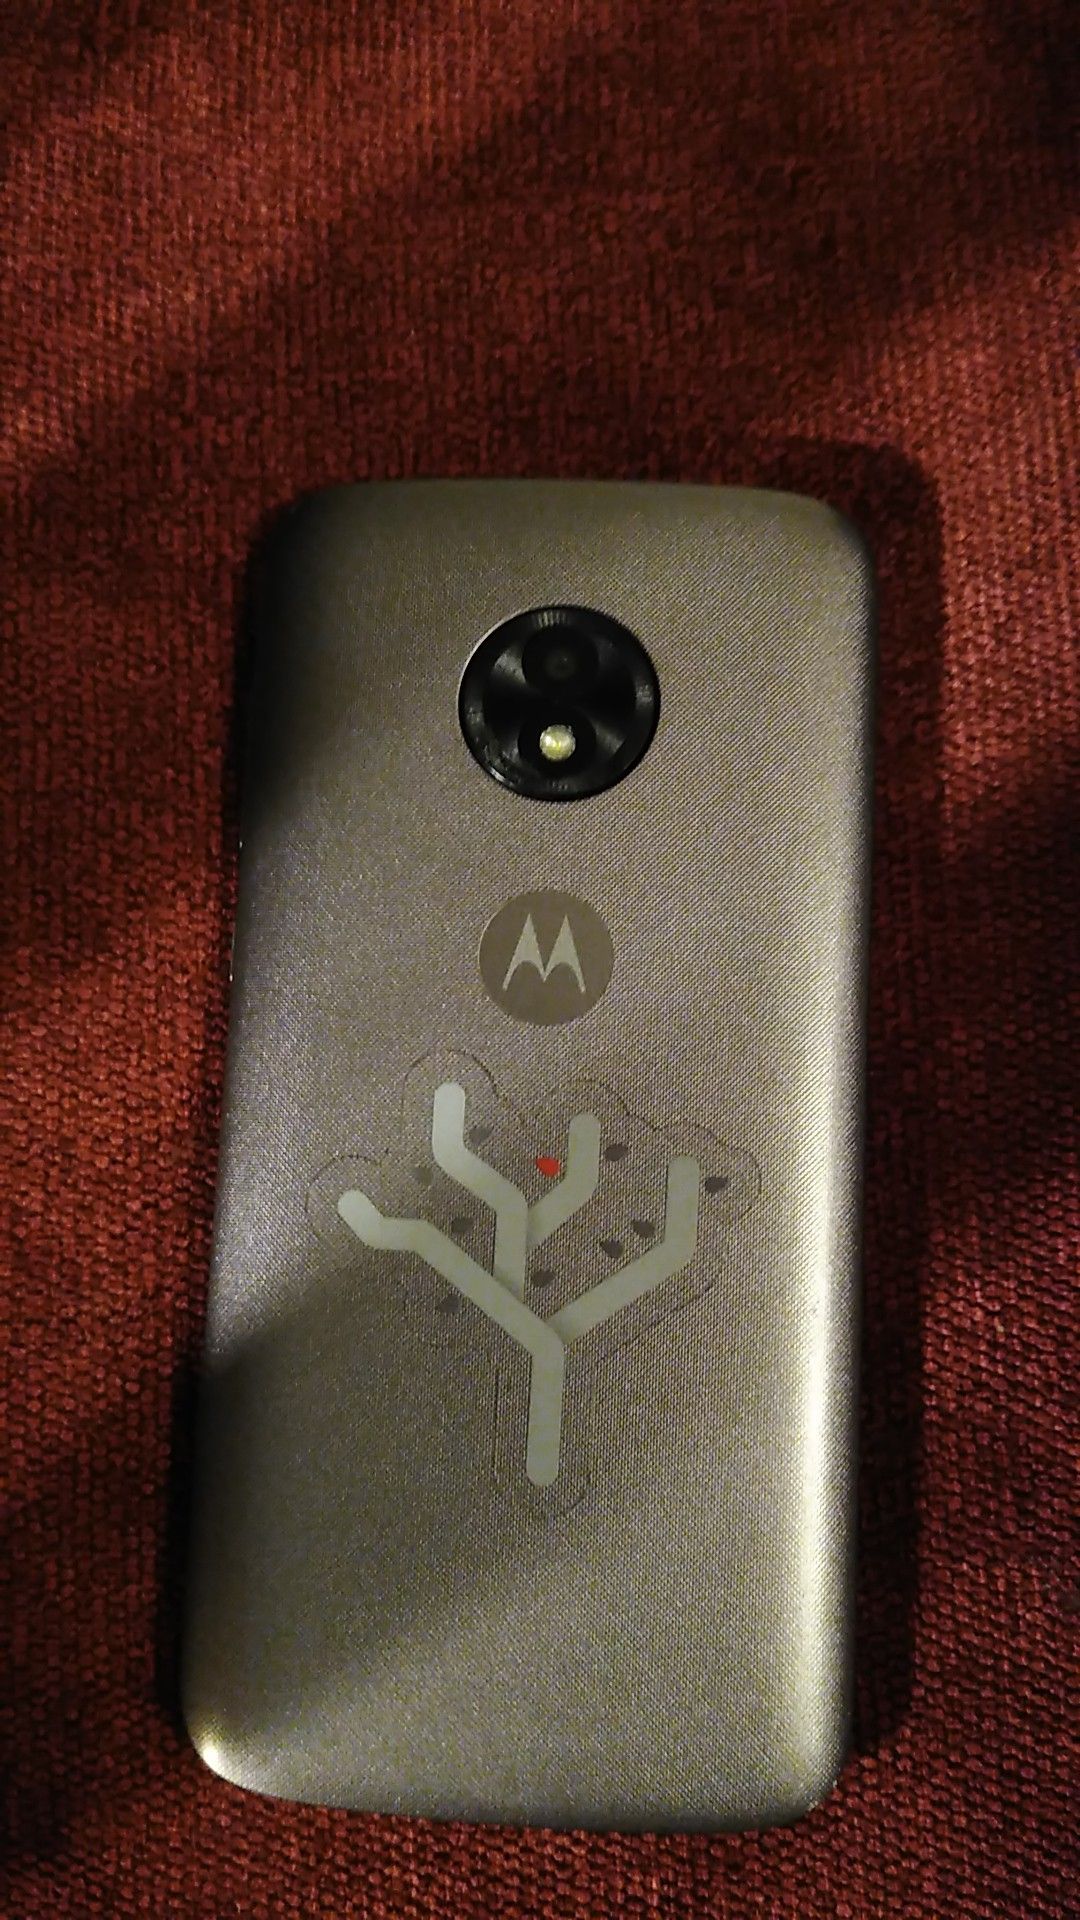 Moto e5 play for Metro a month old in very good condition $60 OR BEST OFFER